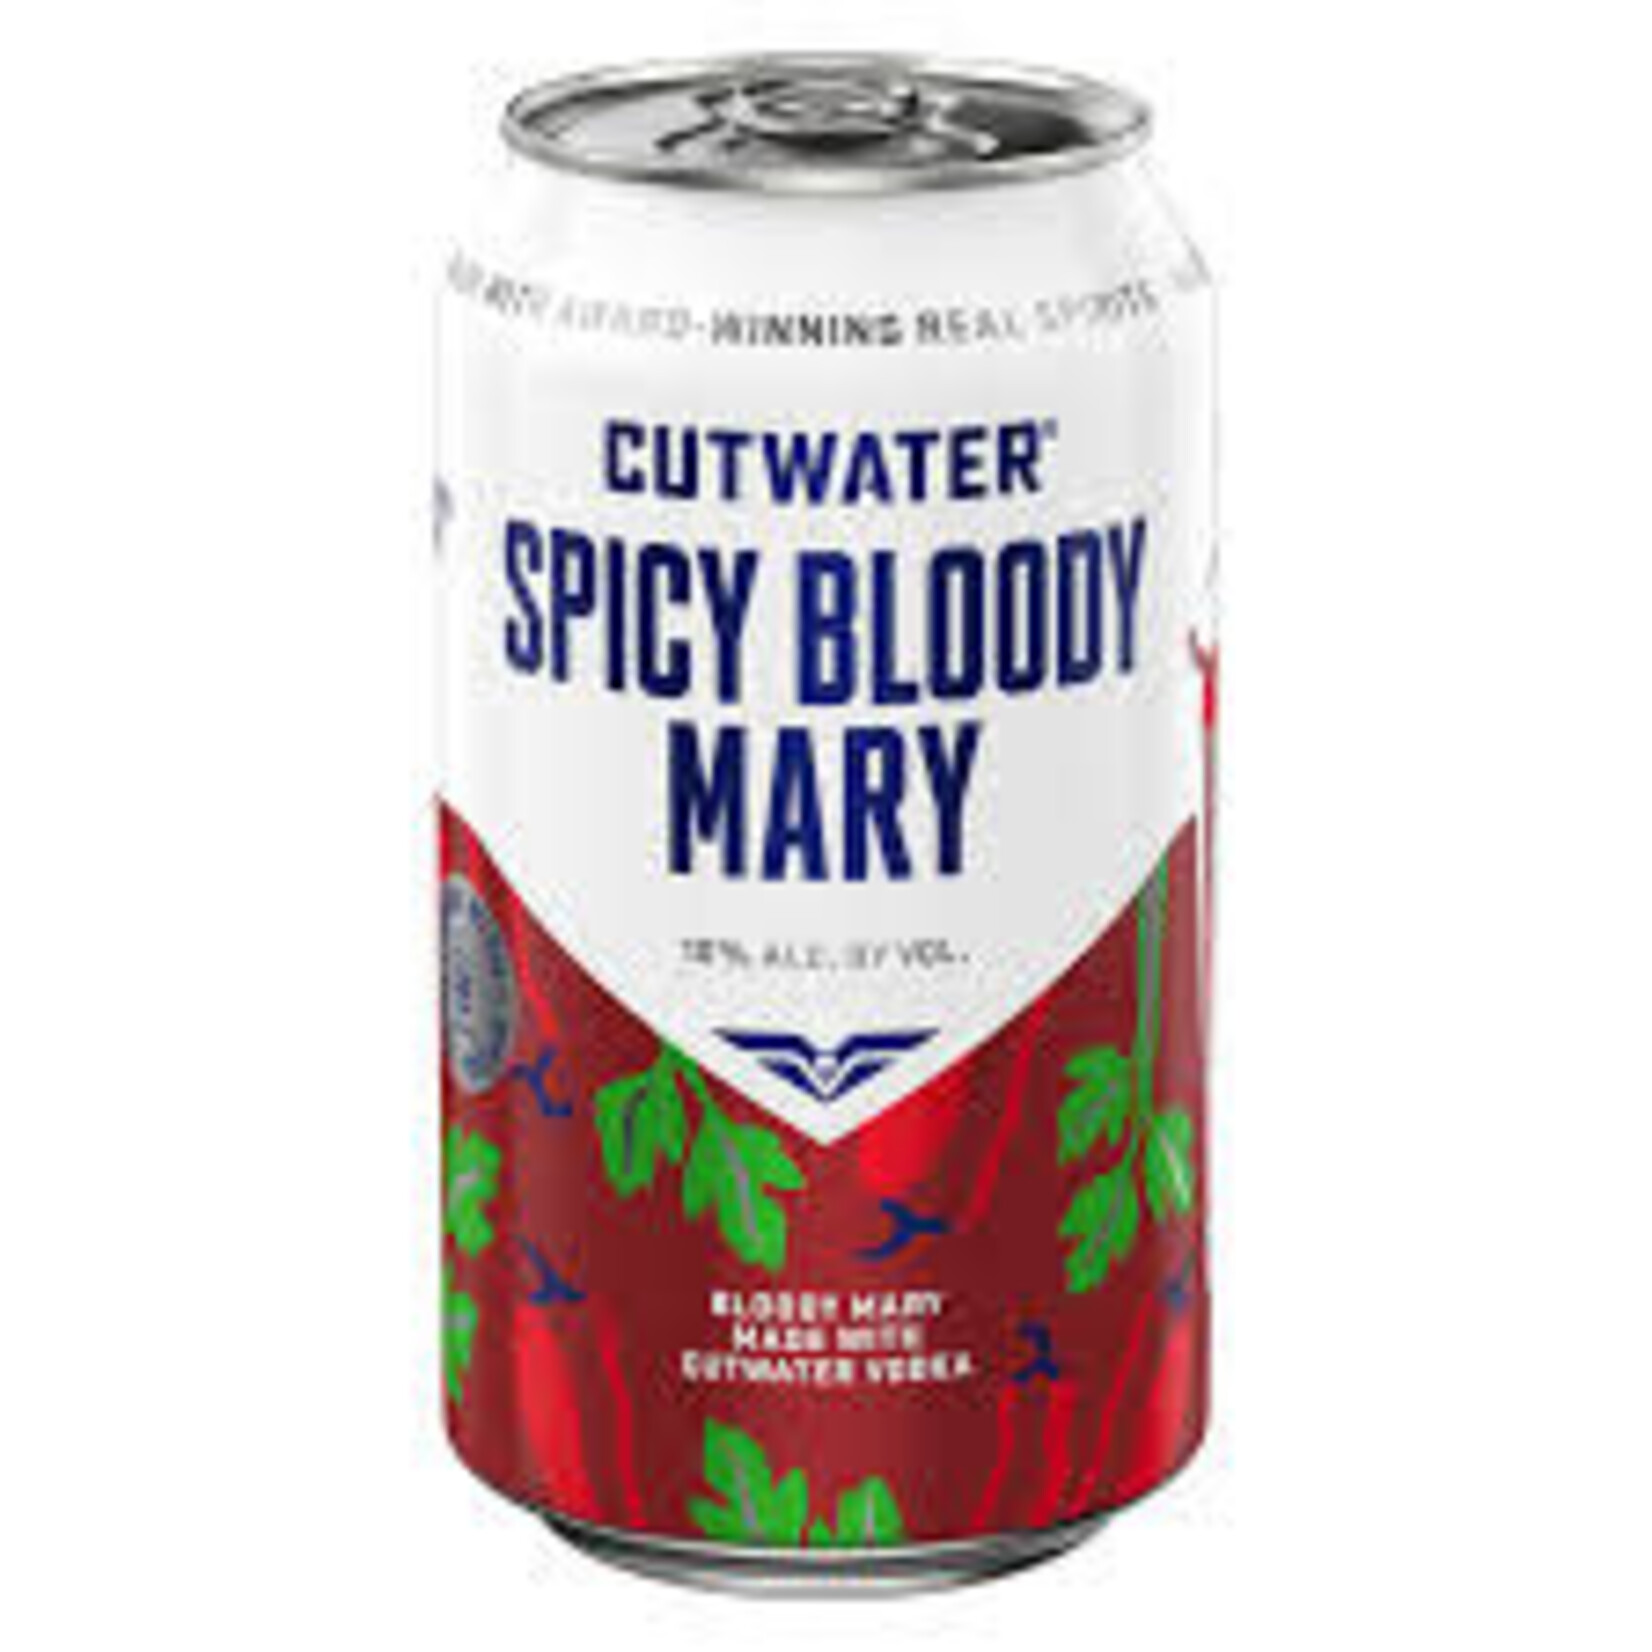 Cutwater Spicy Bloody Mary